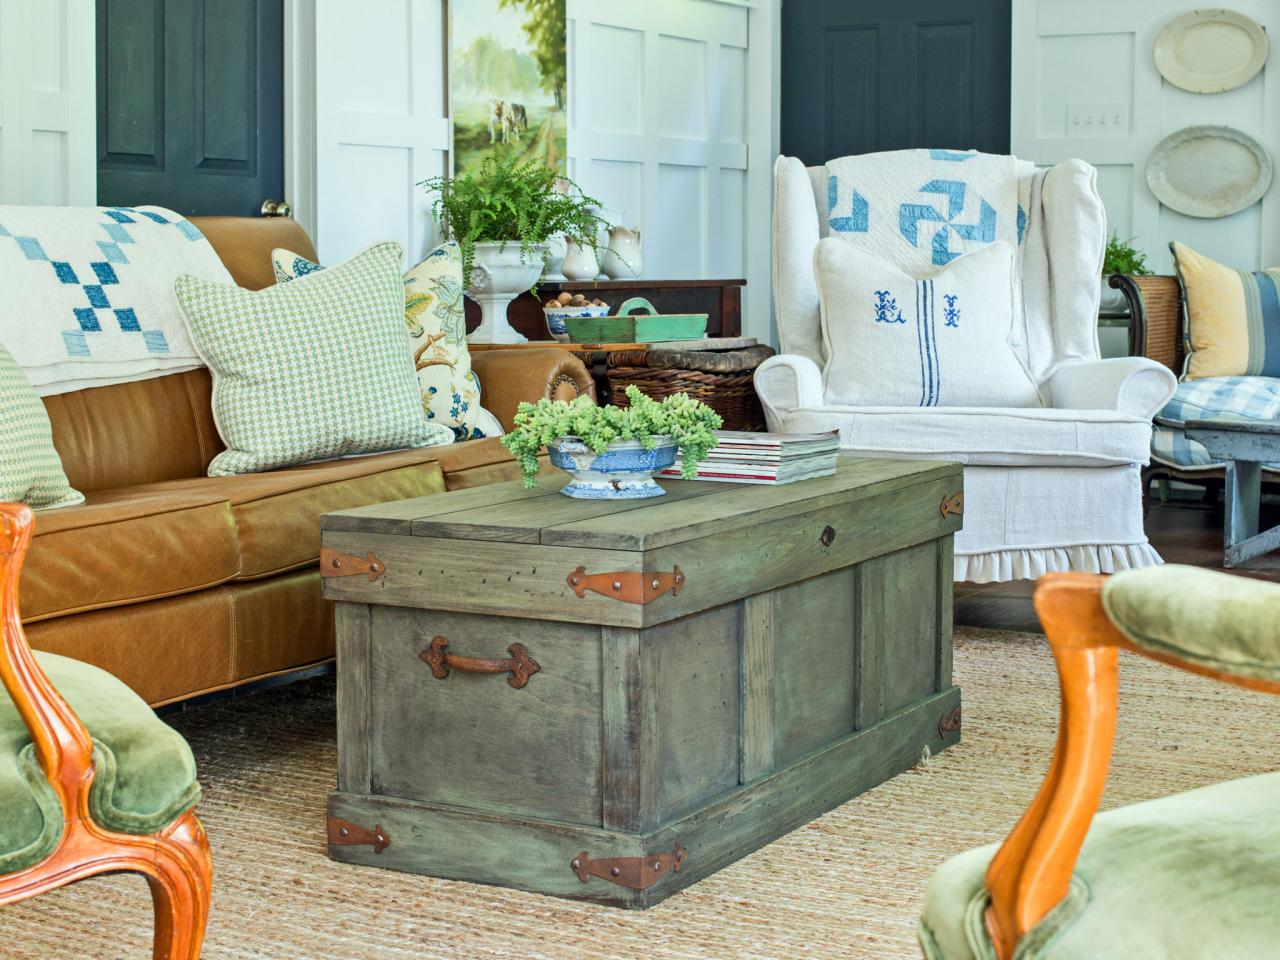 How to Construct a Rustic Trunk-Style Coffee Table